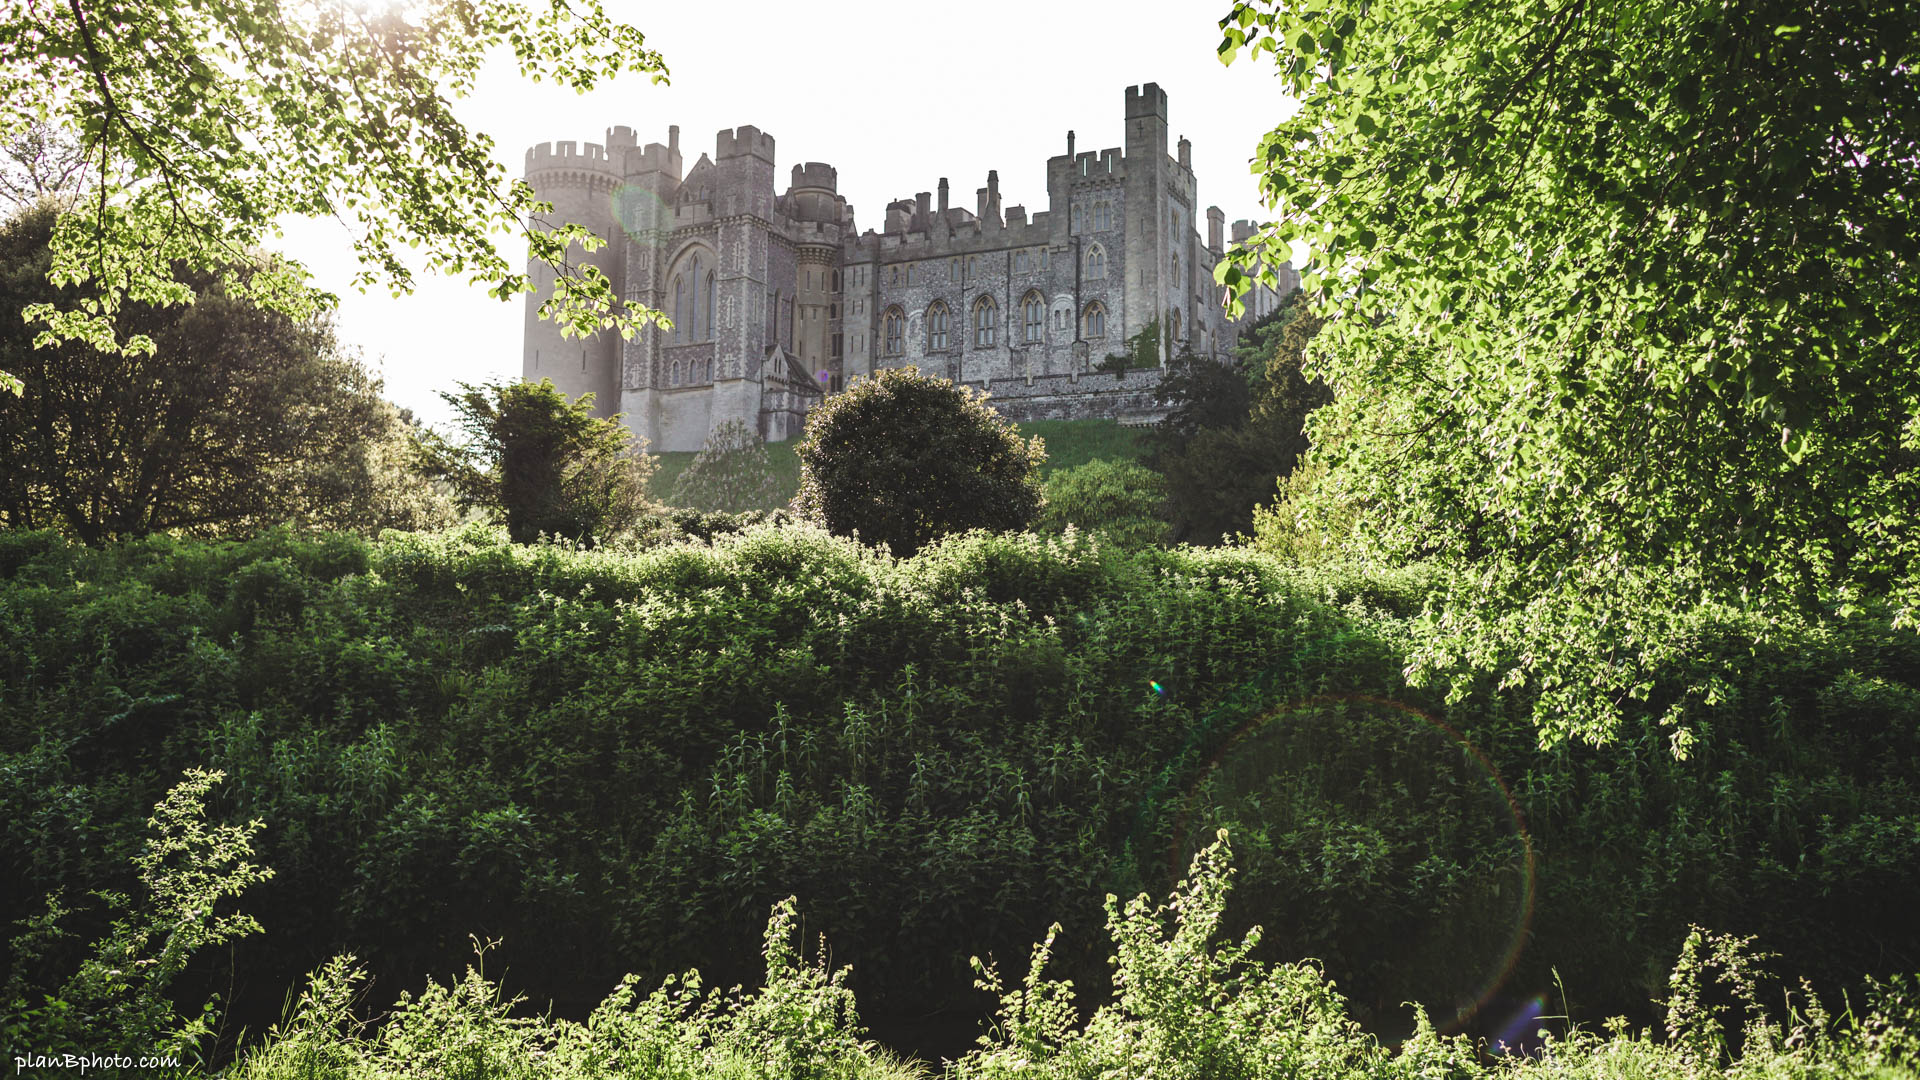 Arundel castle in summer surrounded by green trees and bright beams of light